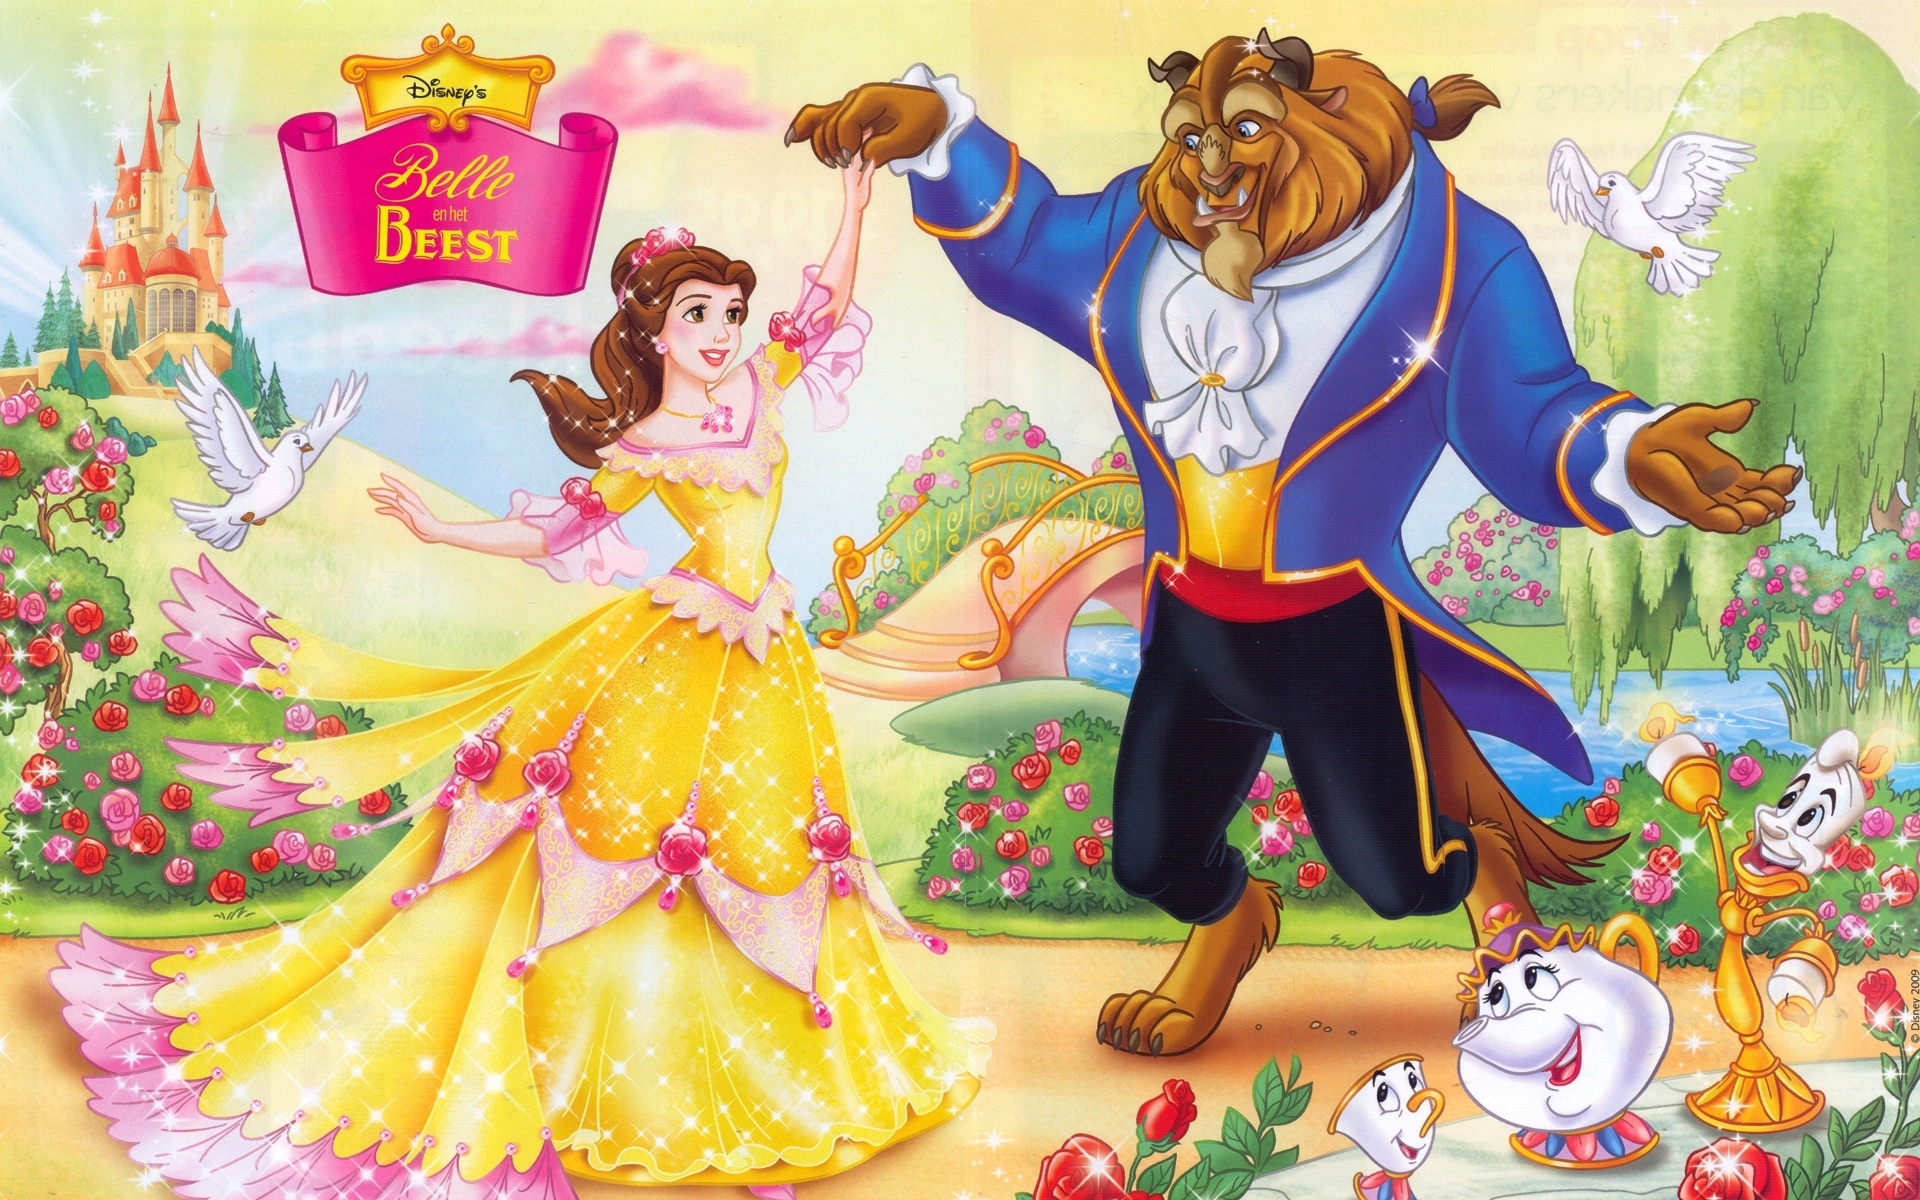 Beauty and the Beast - Beauty and the Beast Wallpaper (7359380) - Fanpop